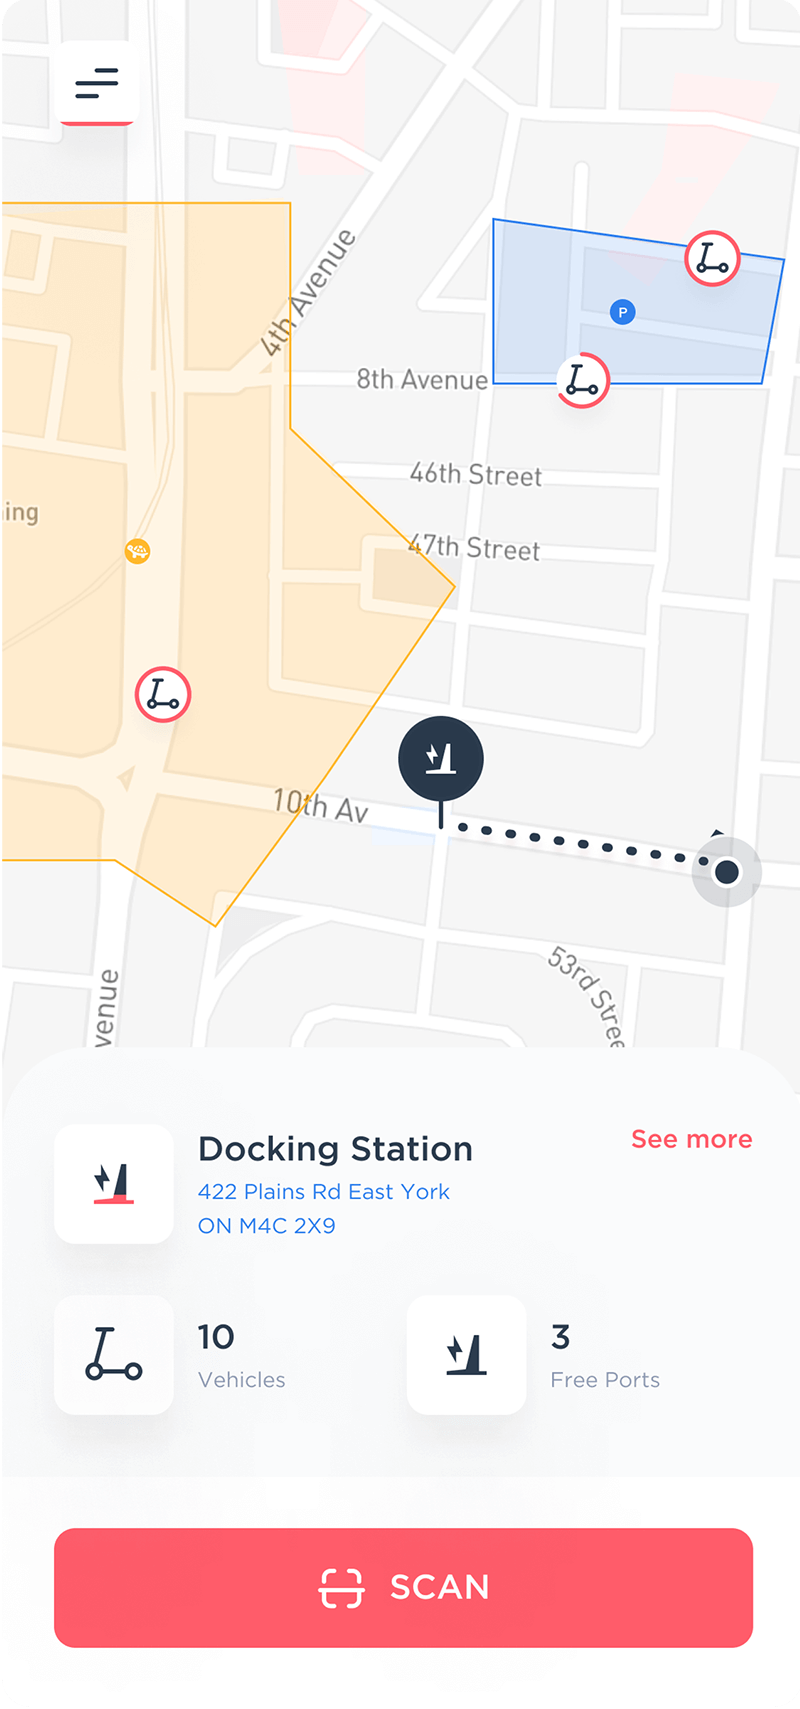 fleet management features scooter docking station map